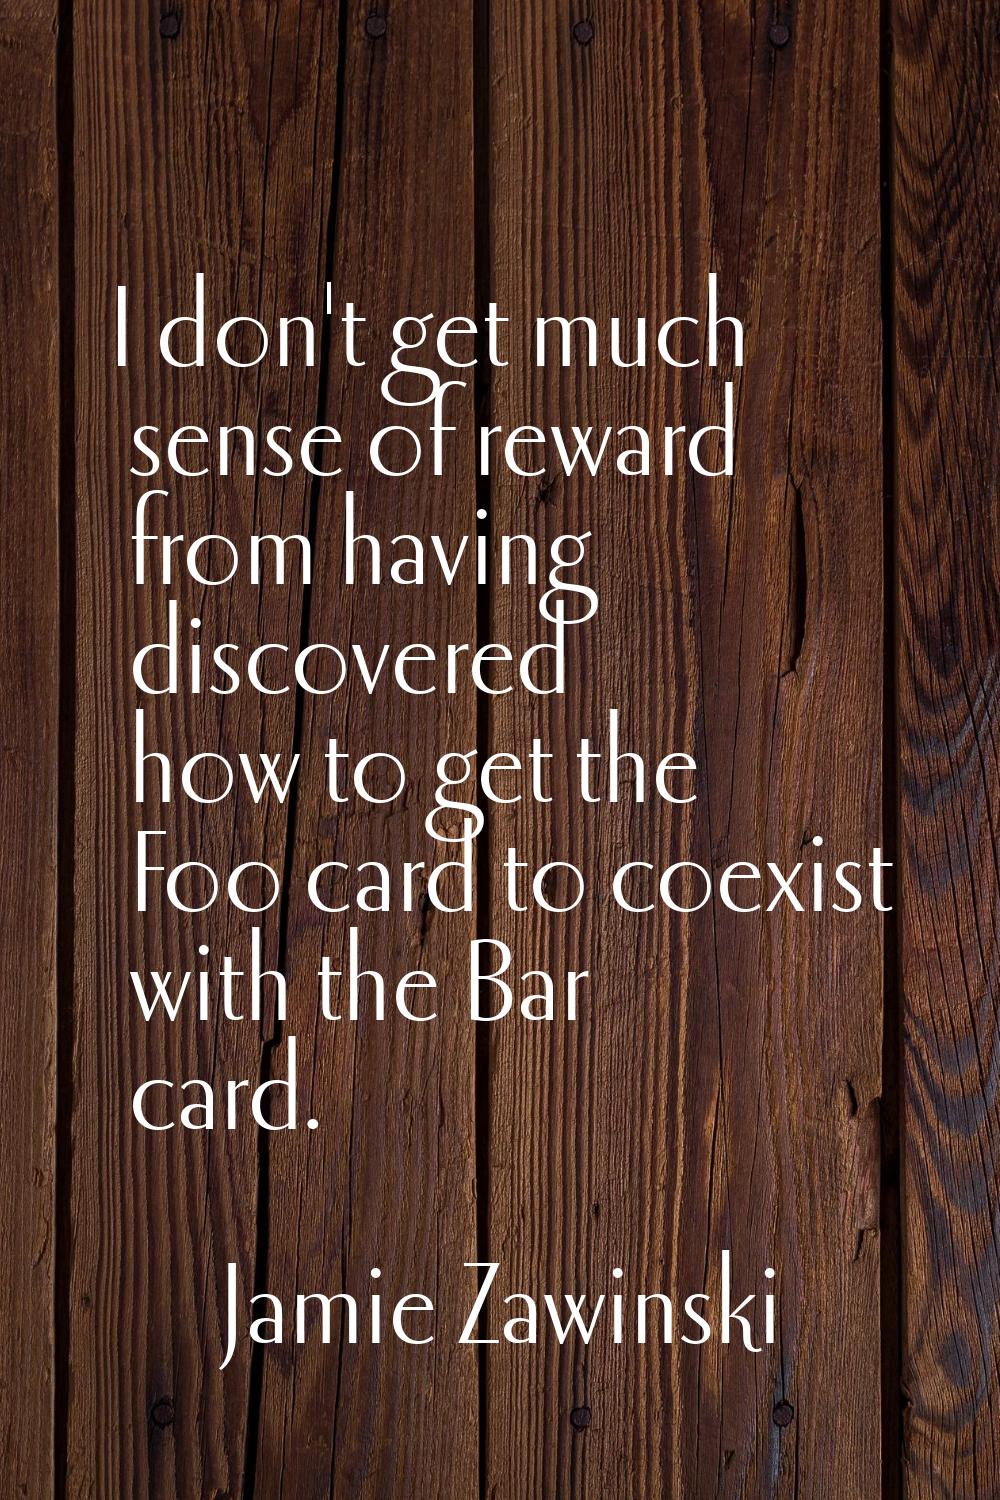 I don't get much sense of reward from having discovered how to get the Foo card to coexist with the